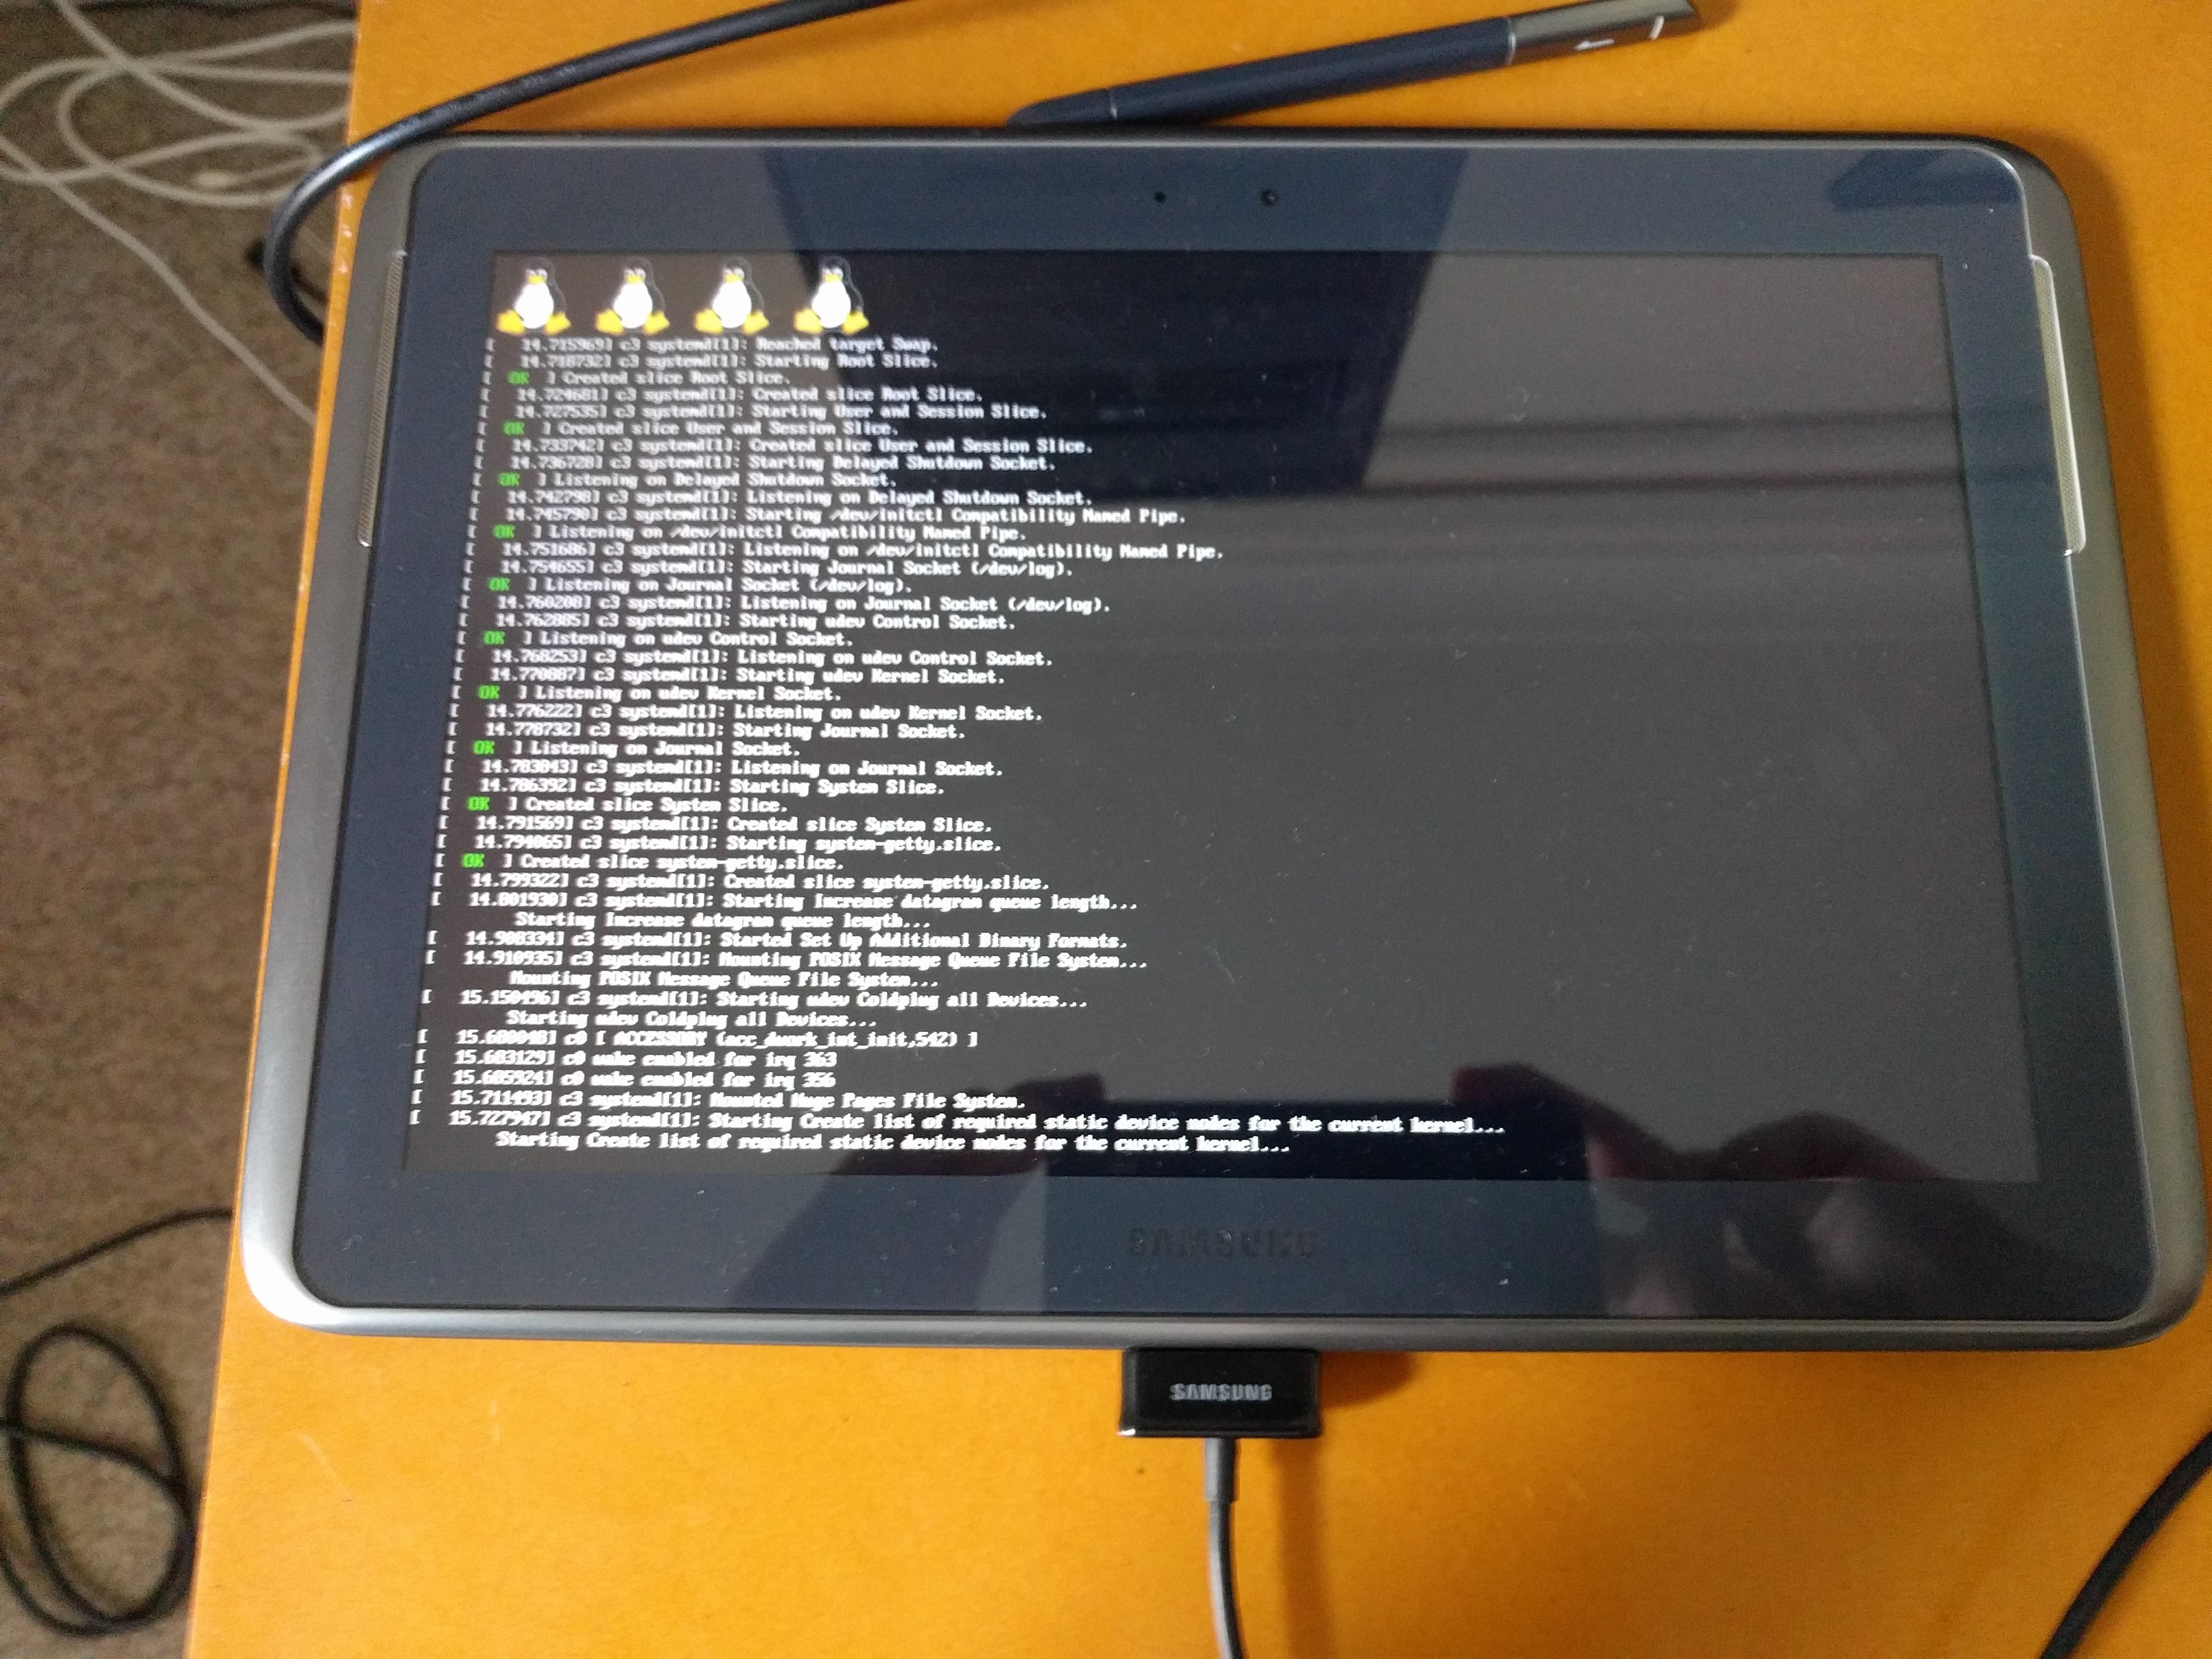 Linux On The Samsung Galaxy Tab 10 1 And You Can Too Wikis